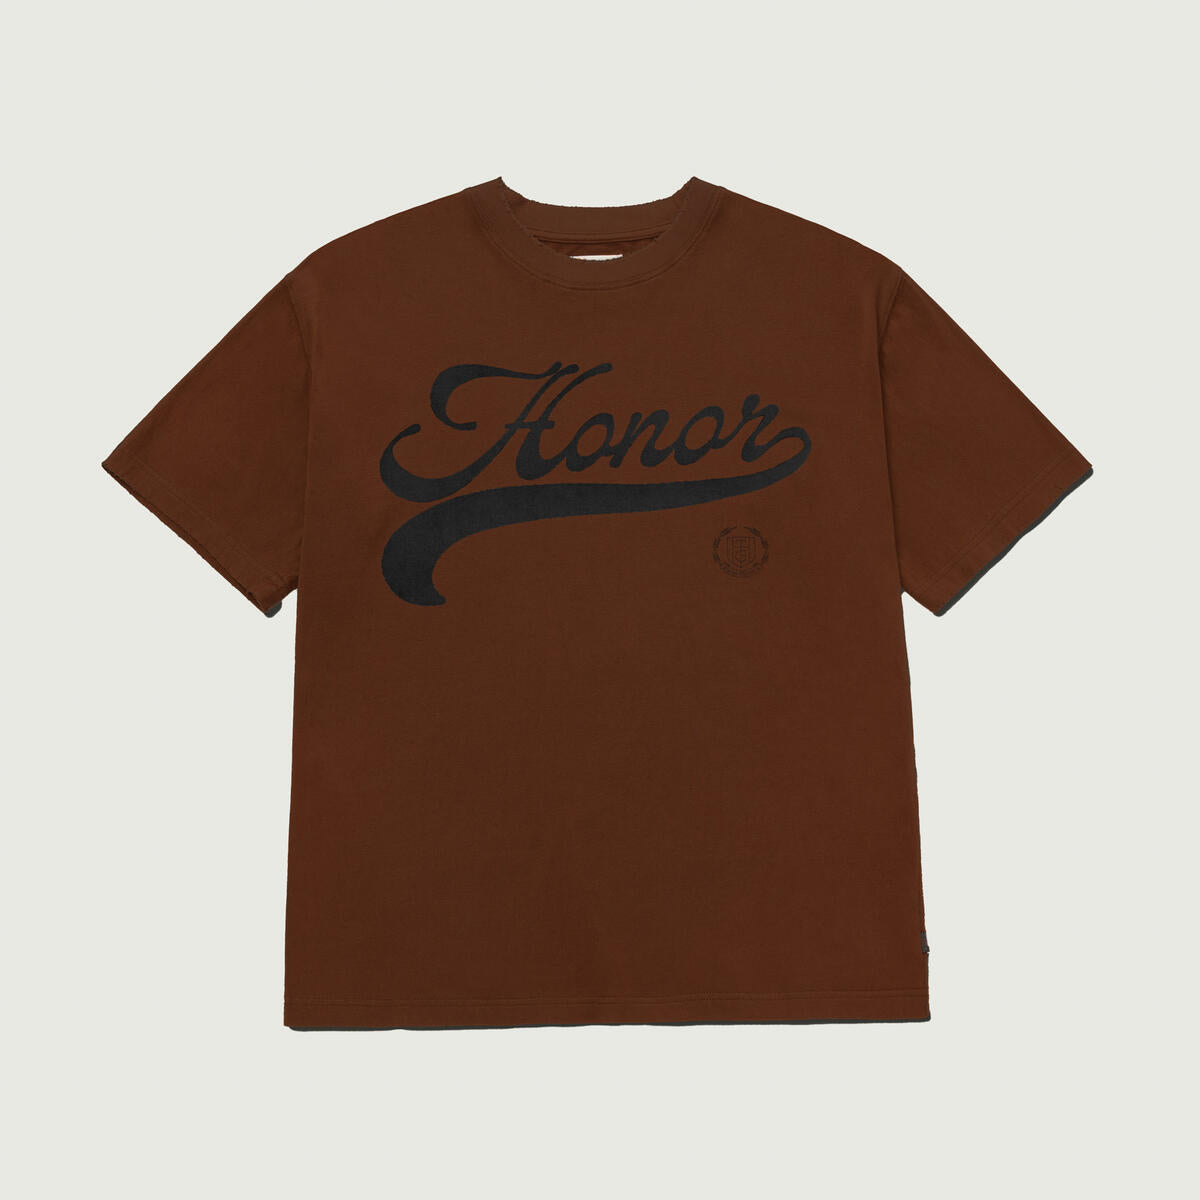 HOLIDAY SCRIPT S/S Tee